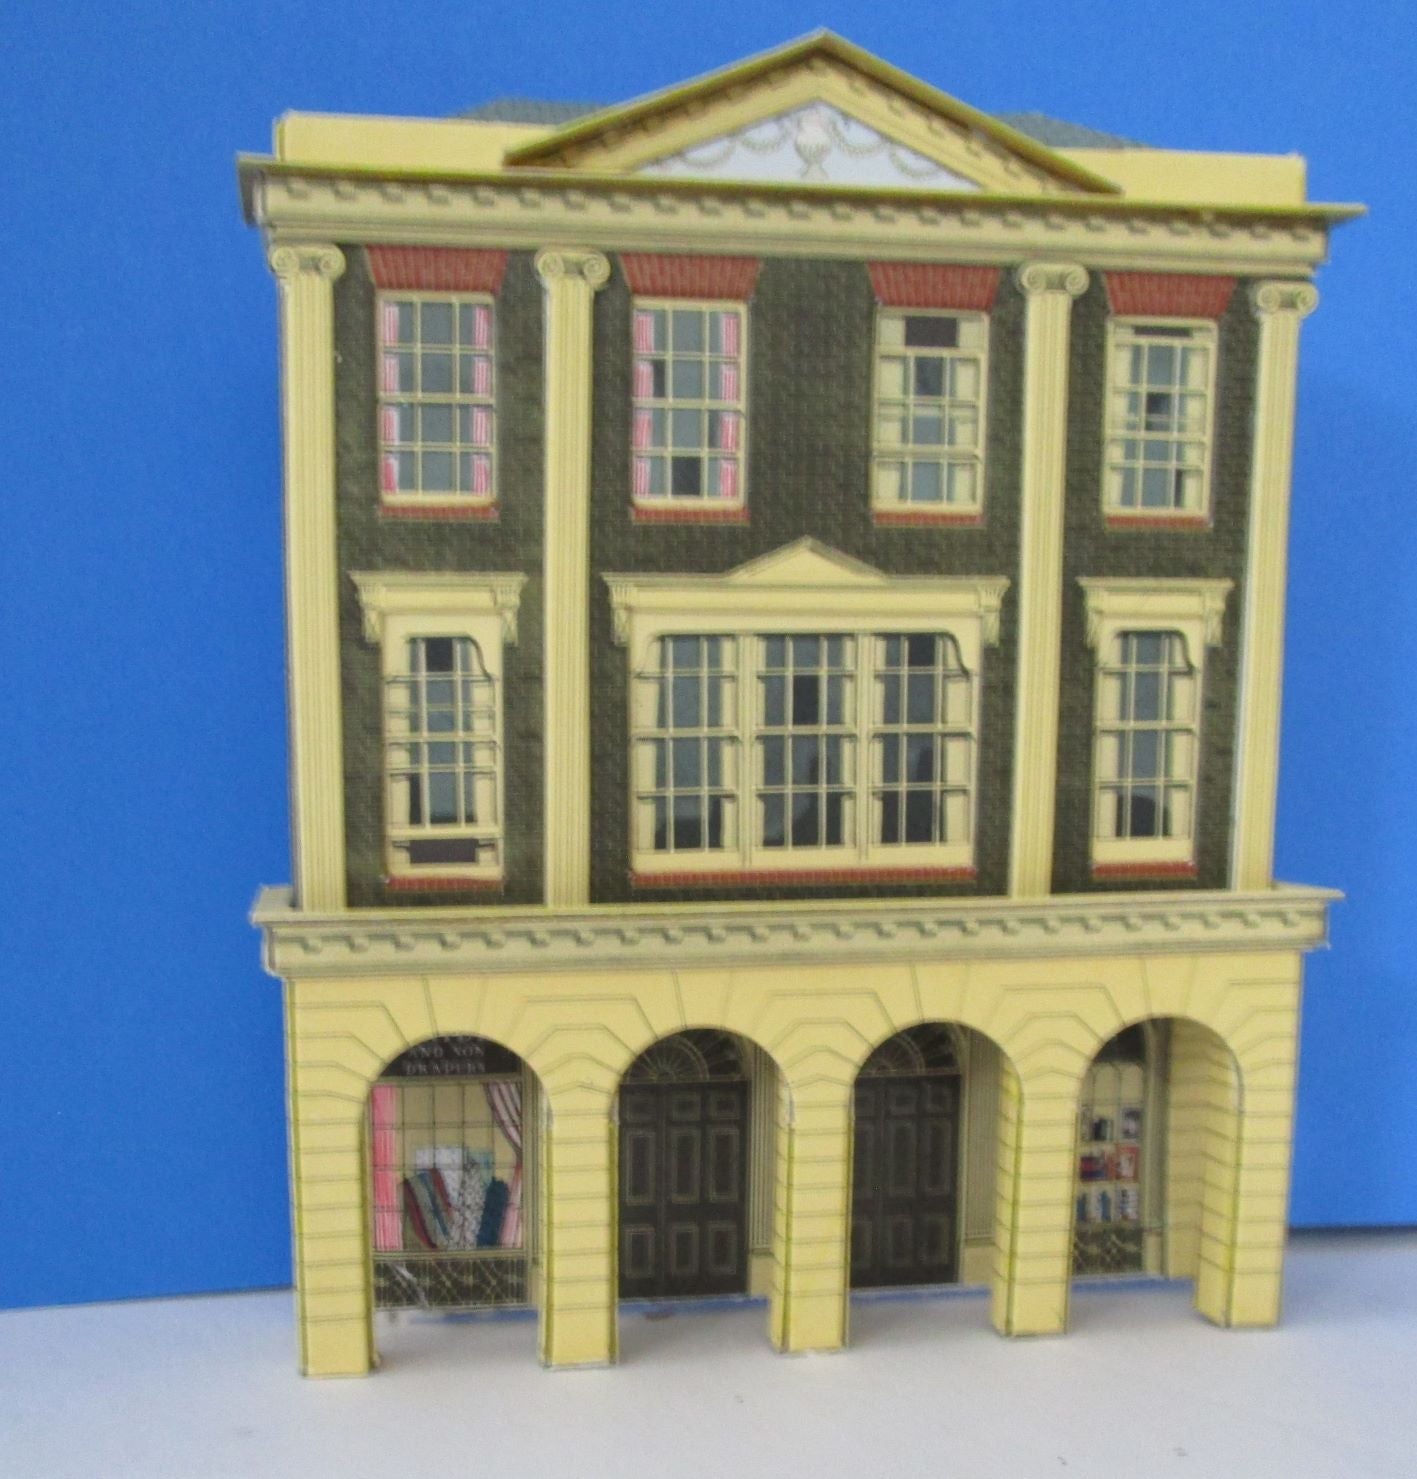 UB235 Half relief Town Hall with shops below  - built from a Superquick kit